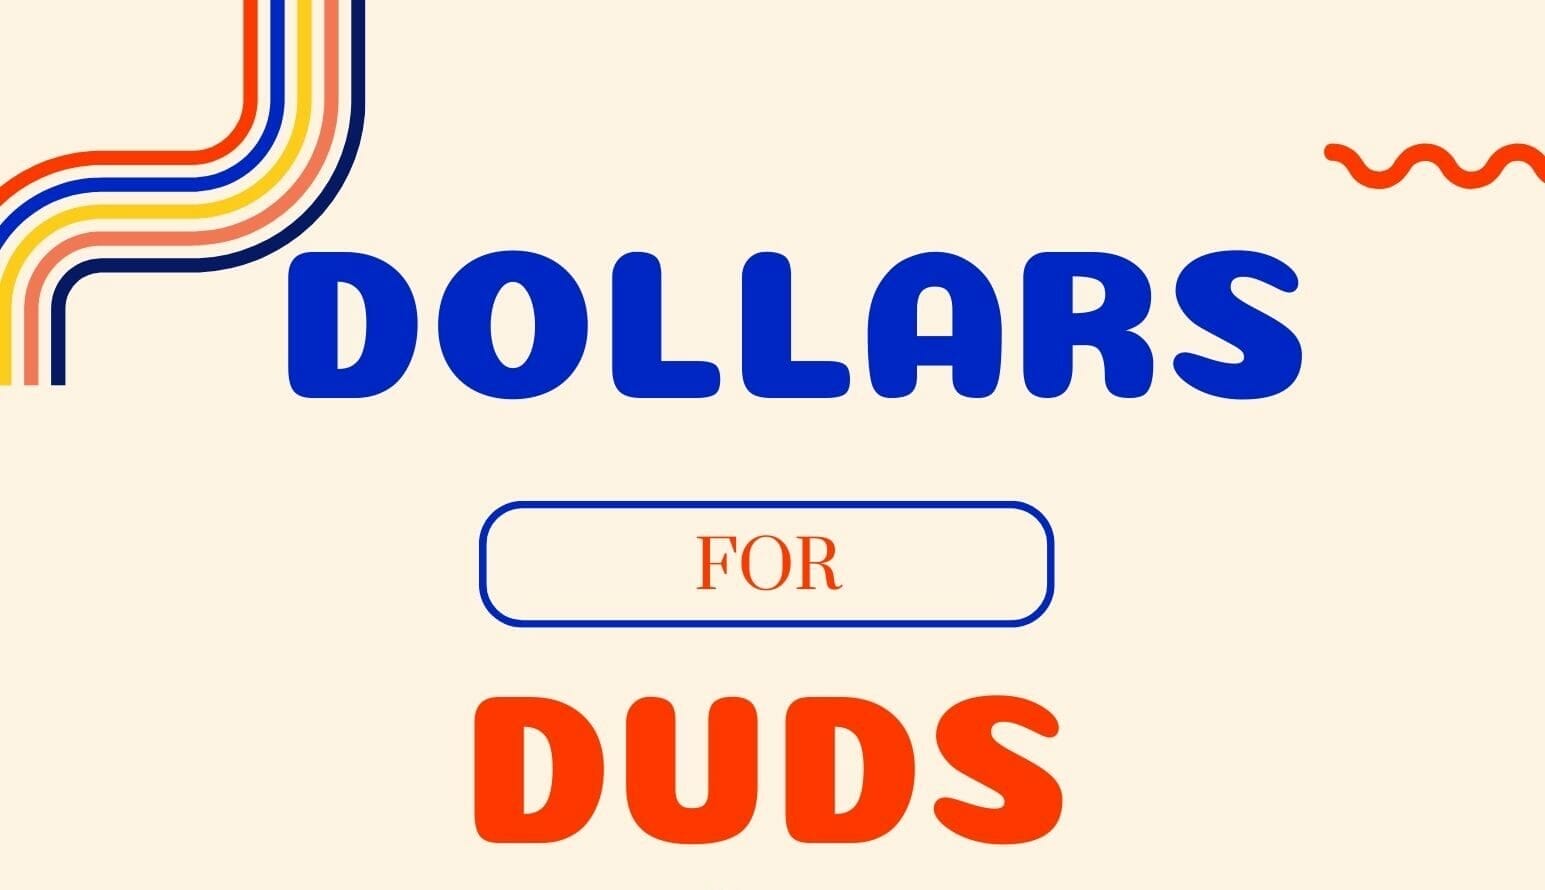 Dollars-4-duds-all-year-long